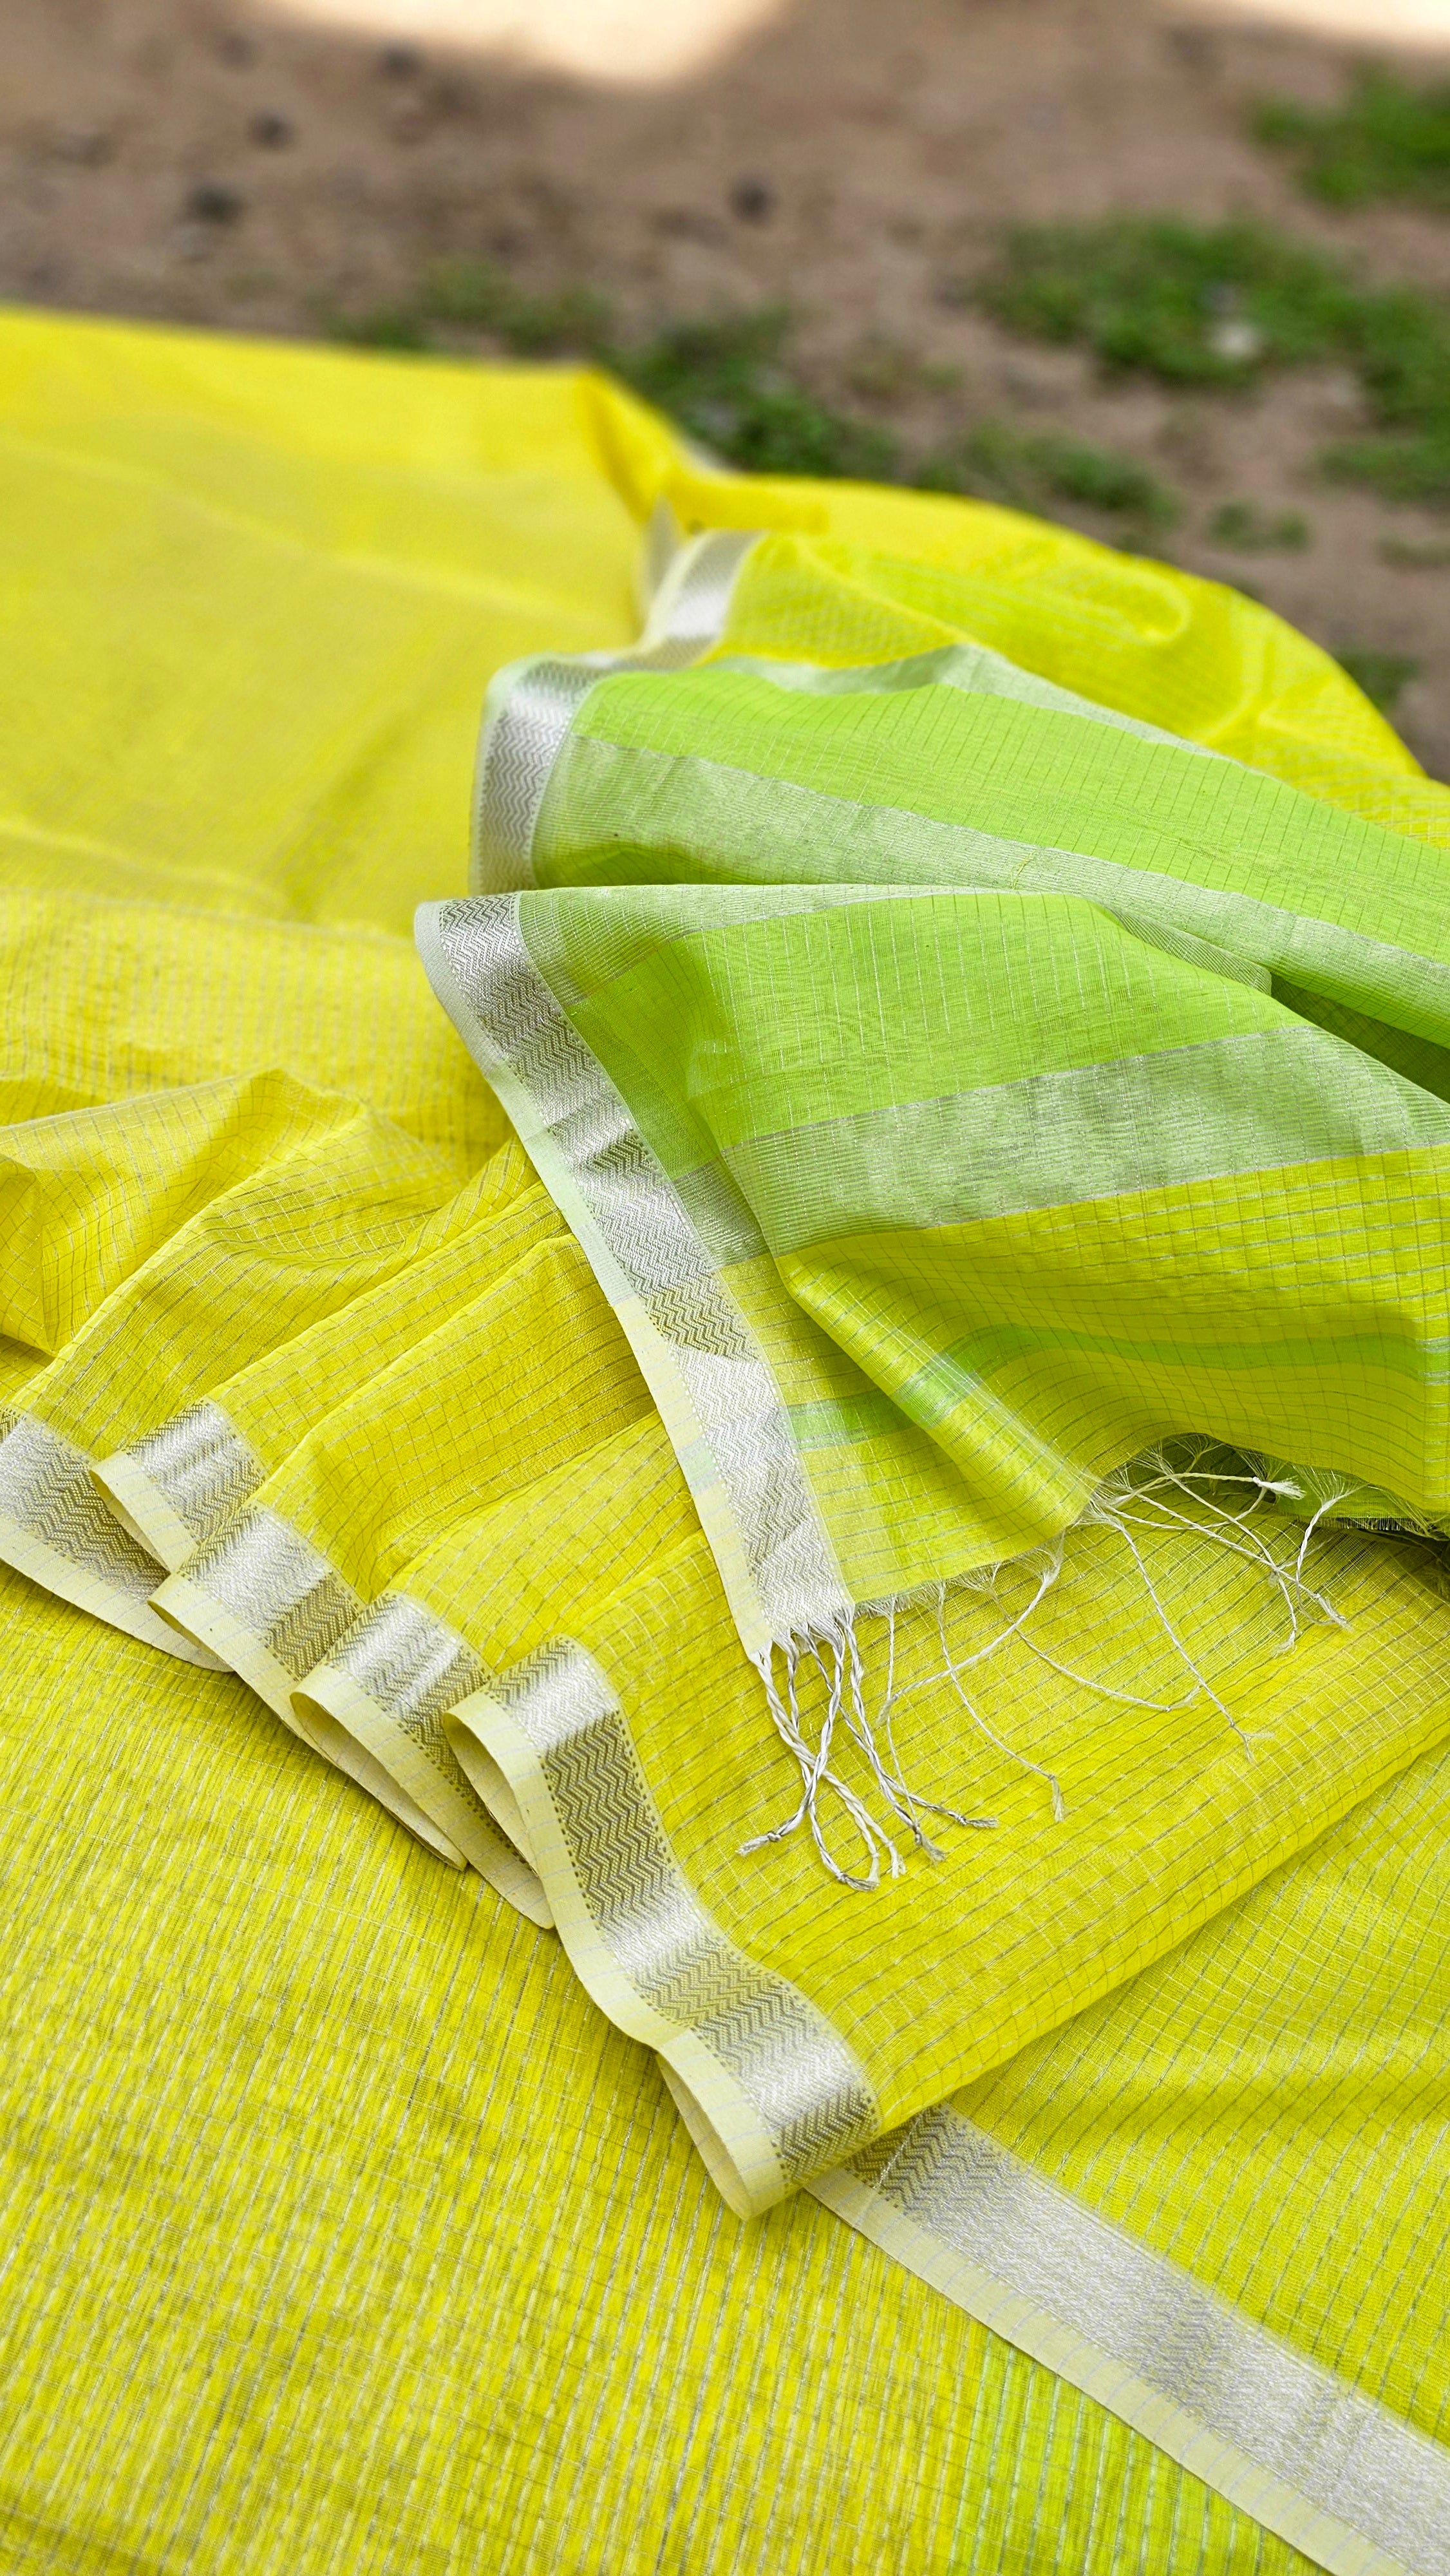 Which colour matches a yellow saree blouse? - Quora